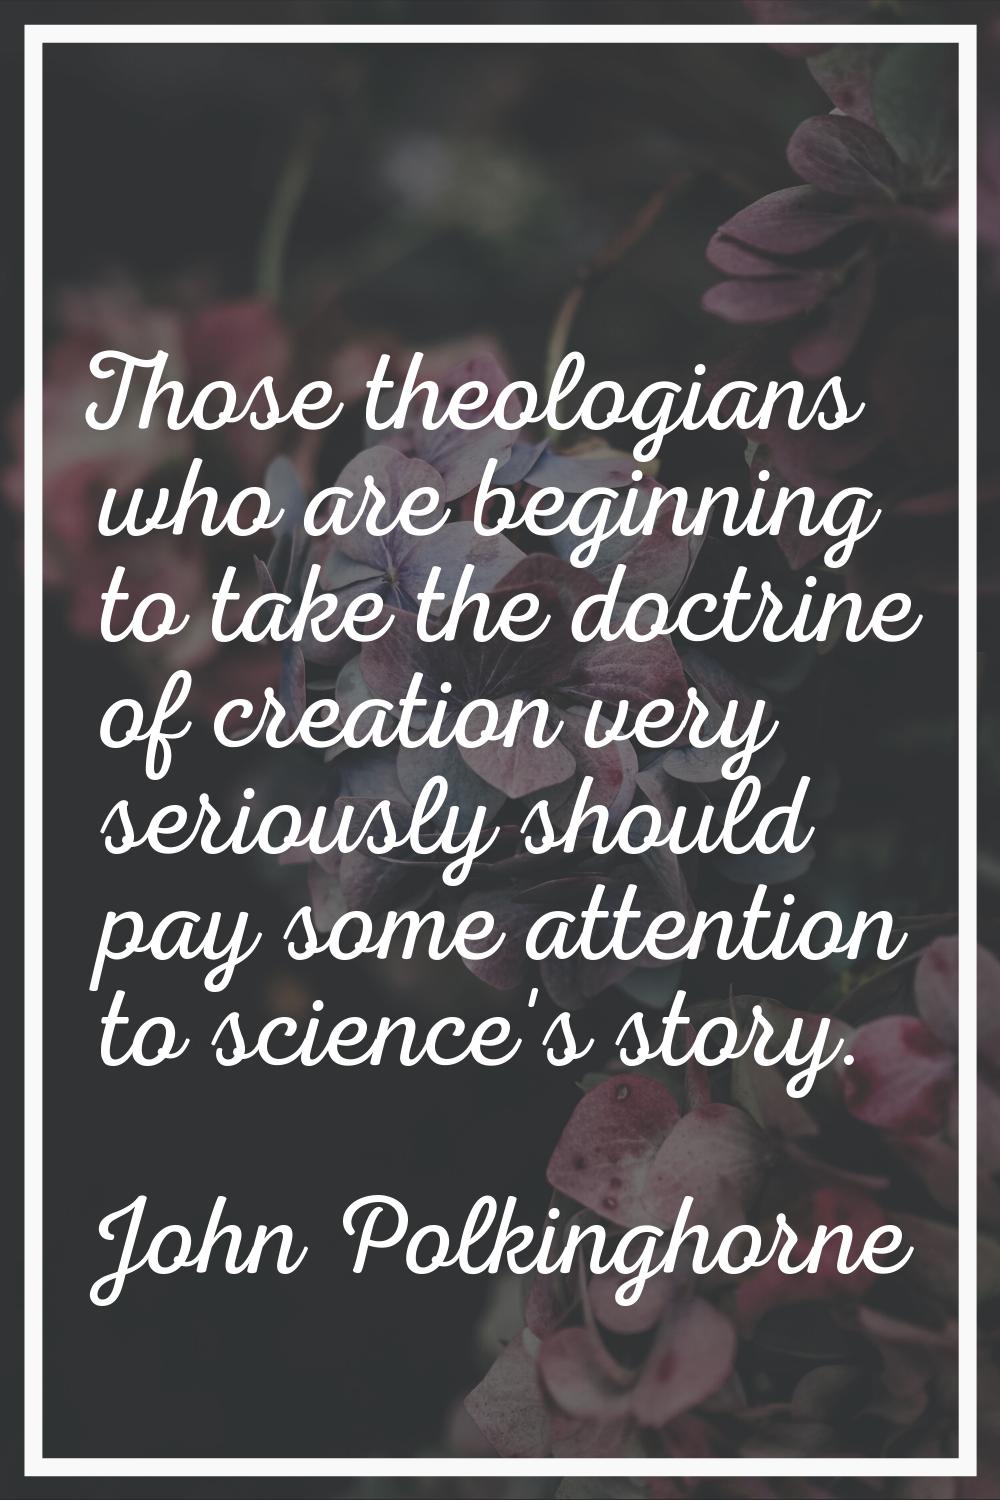 Those theologians who are beginning to take the doctrine of creation very seriously should pay some